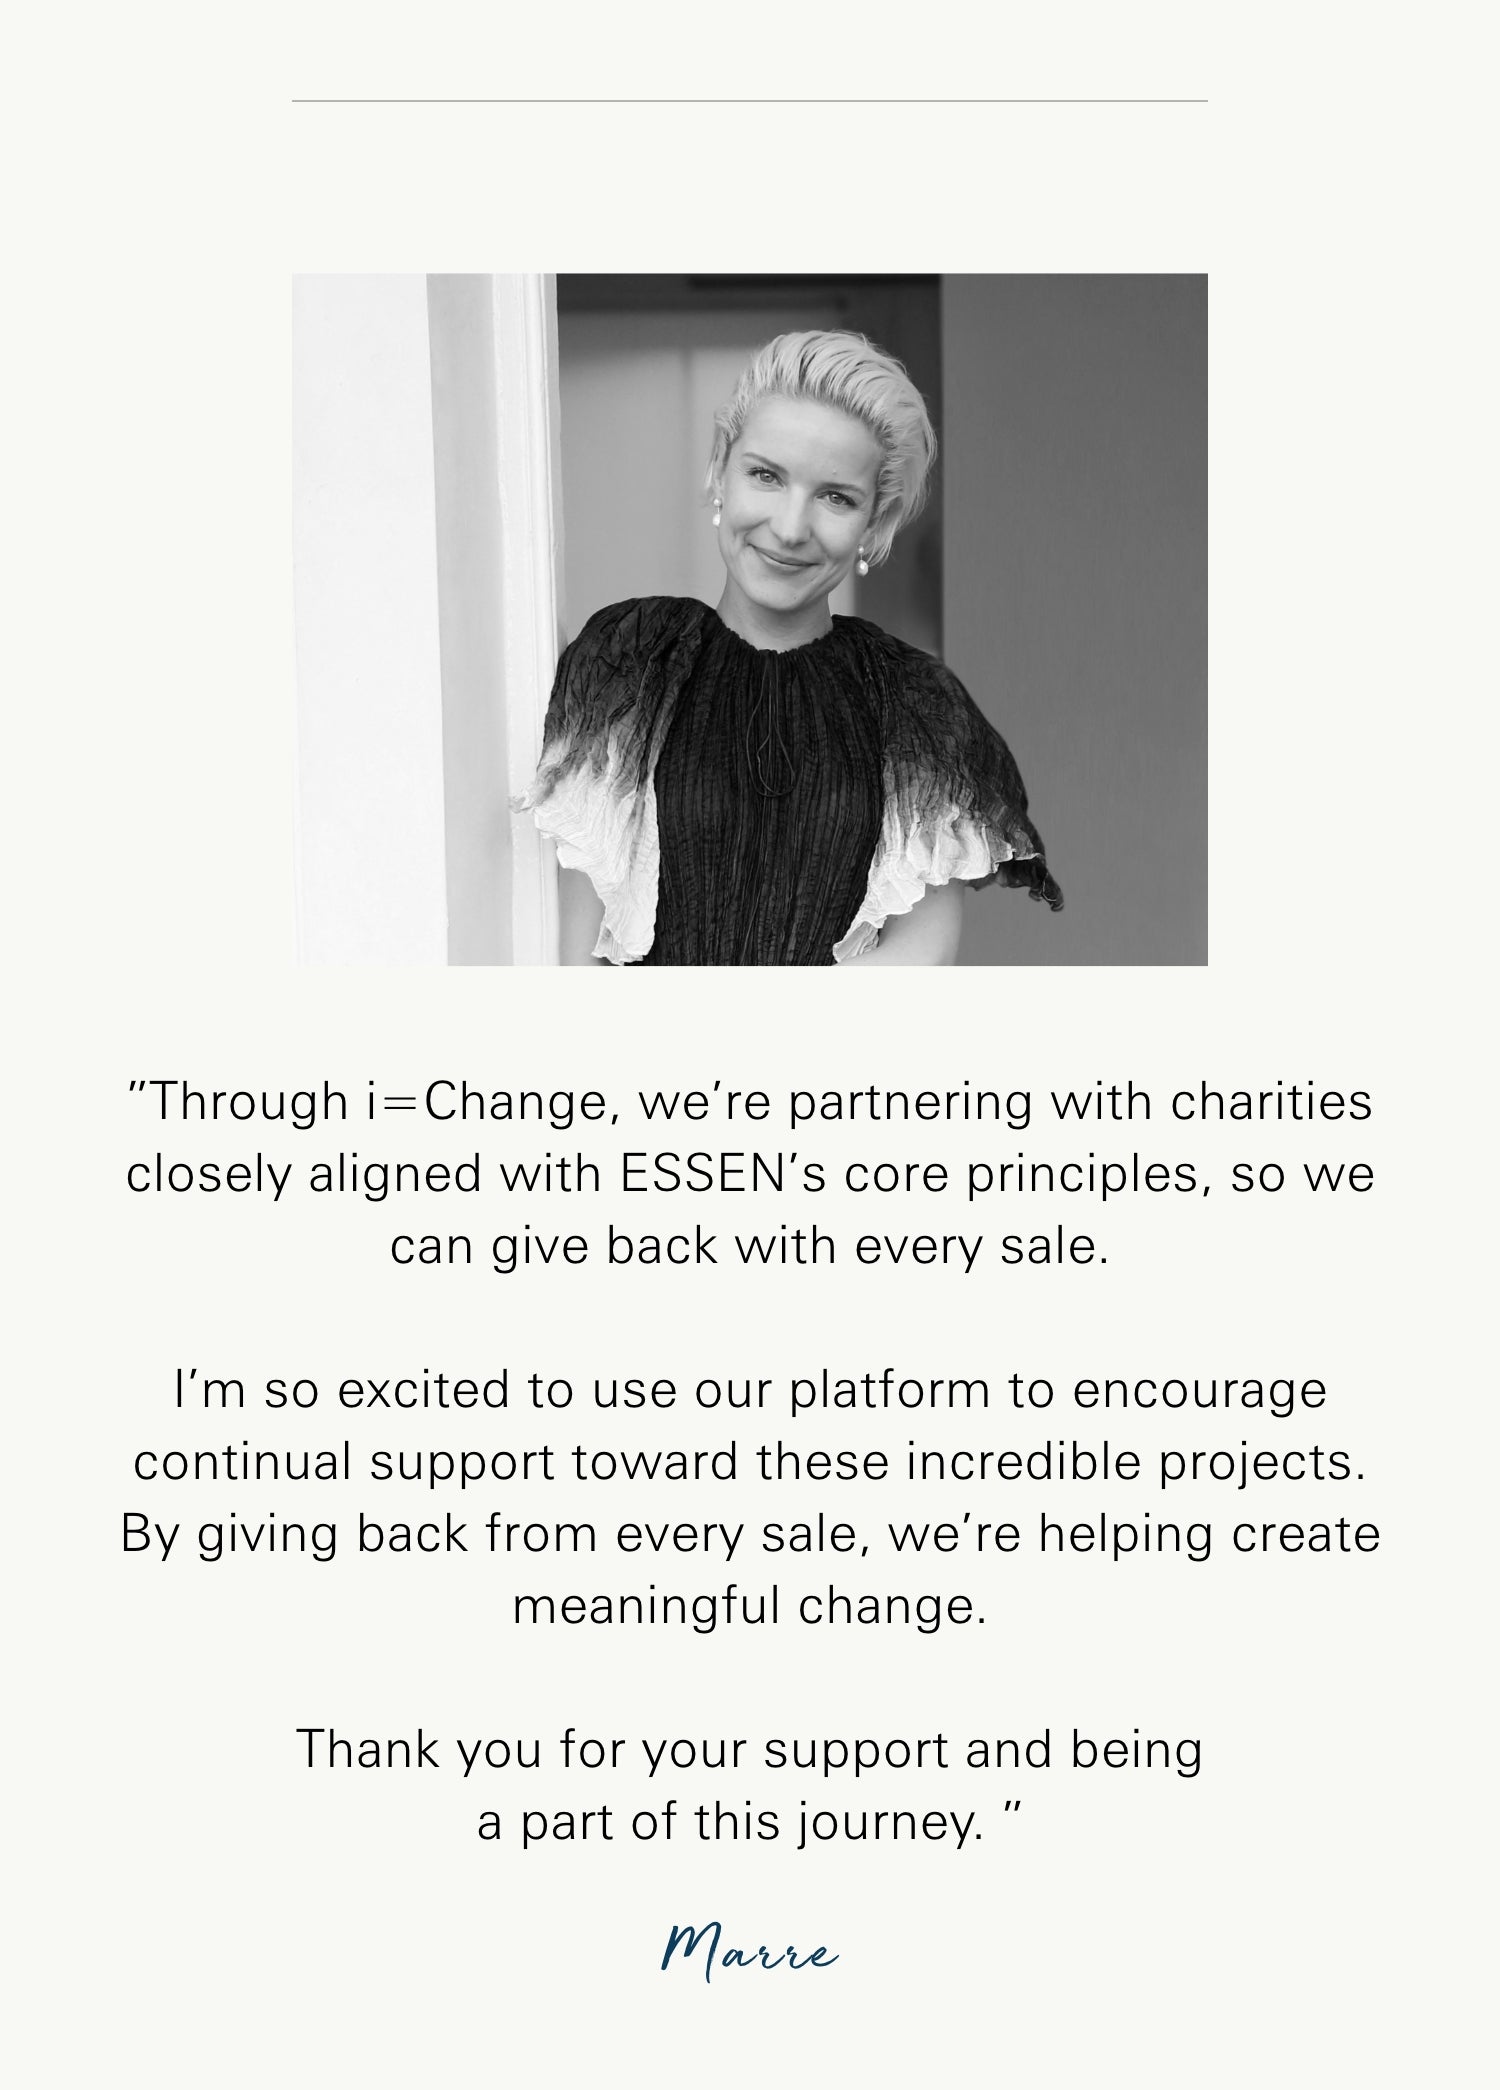 Through I=Change, we’re partnering with charities closely aligned with ESSEN’s core principles.